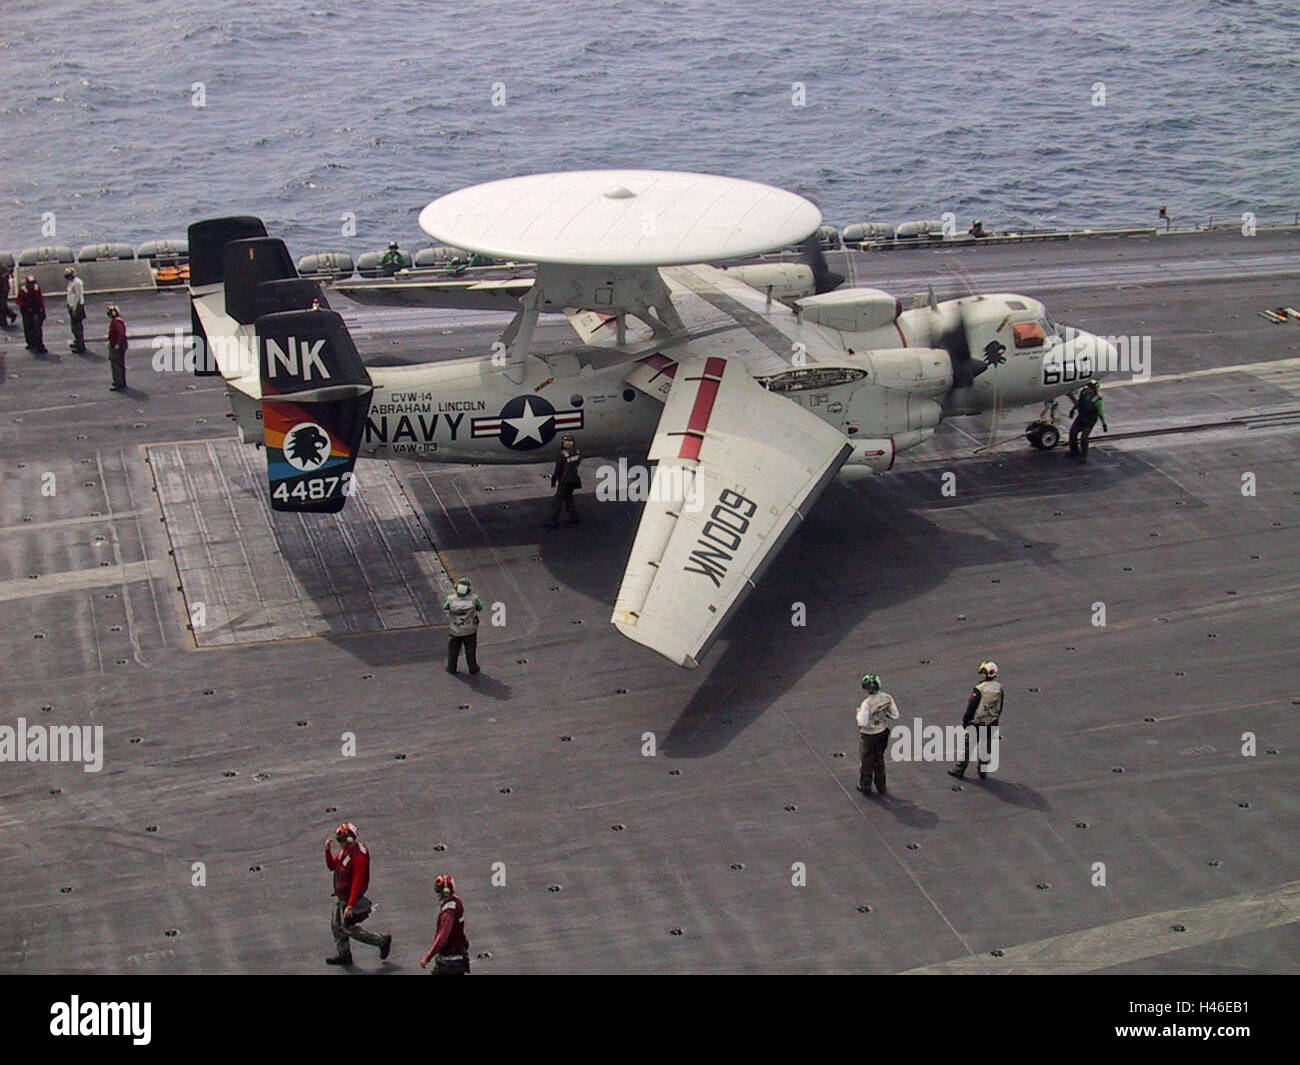 9th March 2003 During Operation Enduring Freedom: an E-2C Hawkeye on the USS Abraham Lincoln in the Persian Gulf. Stock Photo